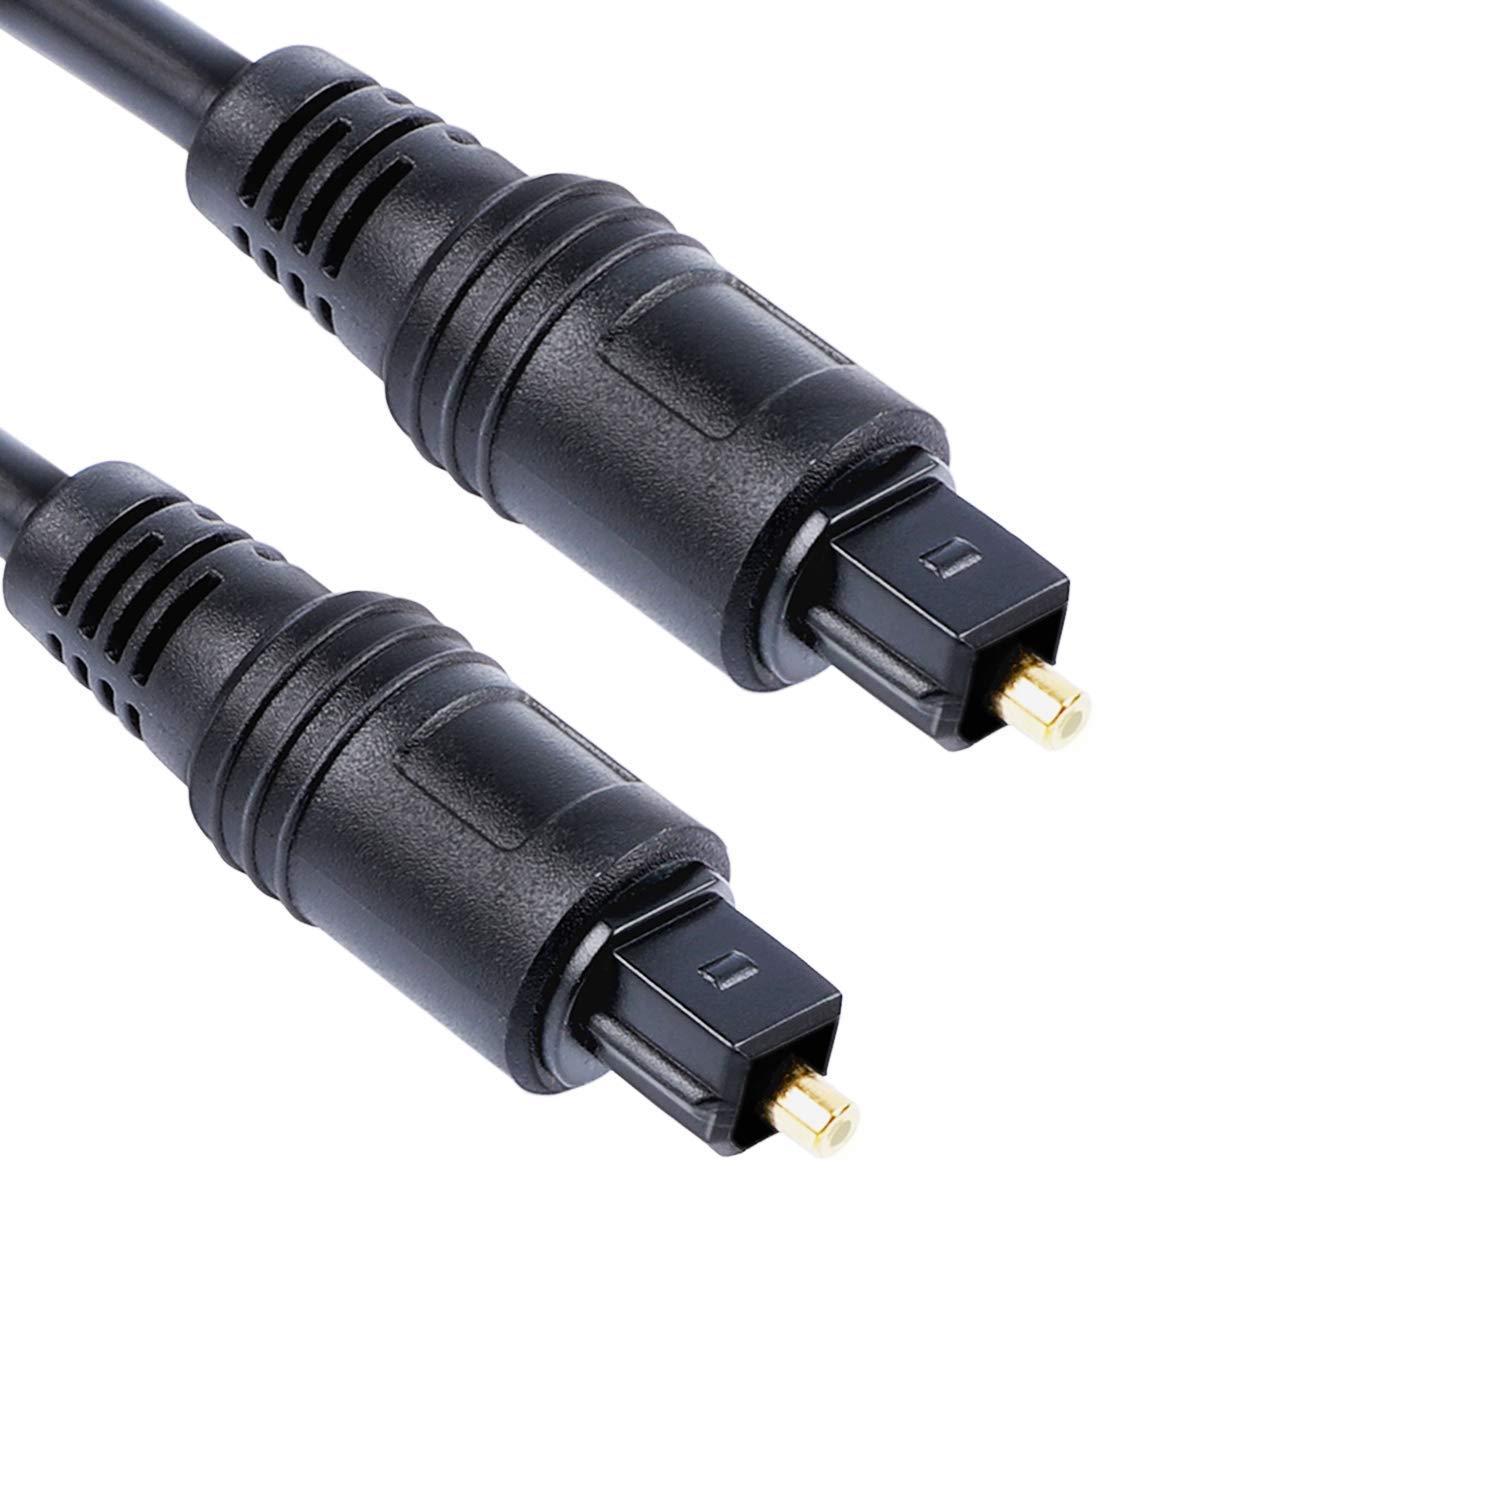 CABLE OPTICHEN K-620 TOSL-TOSL 1M 5MM CABLE OPTICHEN K-620 1M 5MM